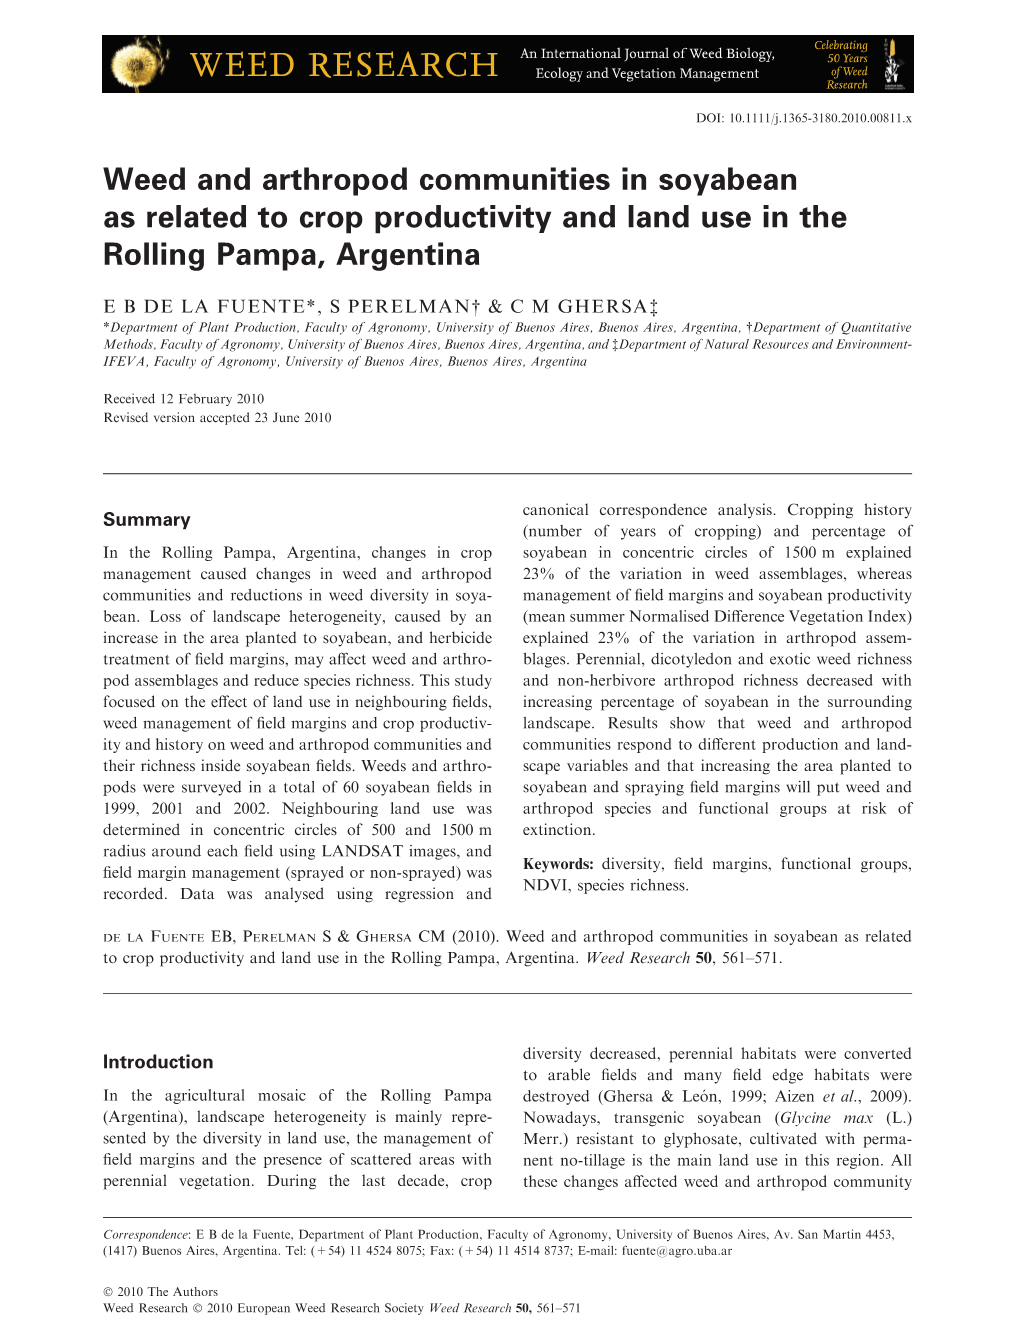 Weed and Arthropod Communities in Soyabean As Related to Crop Productivity and Land Use in the Rolling Pampa, Argentina